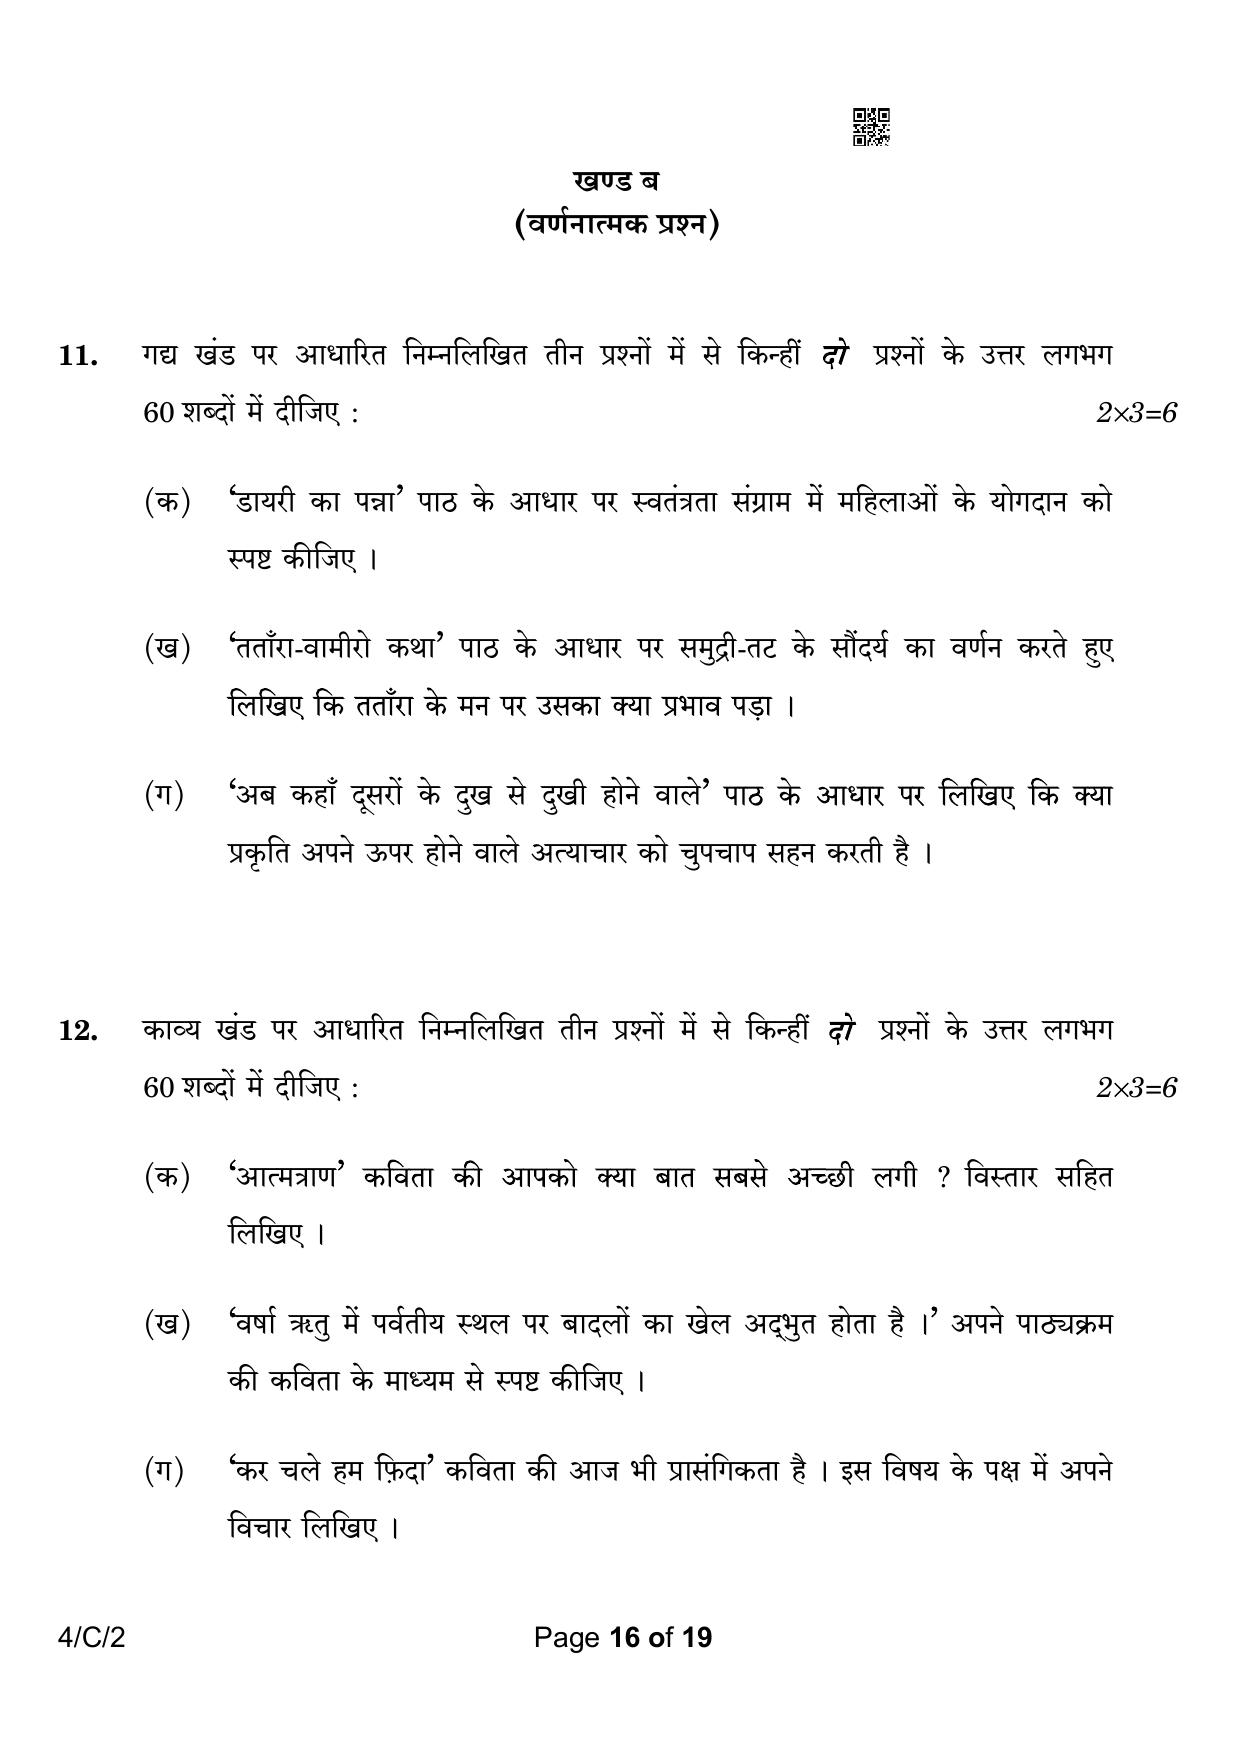 CBSE Class 10 4-2 Hindi B 2023 (Compartment) Question Paper - Page 16